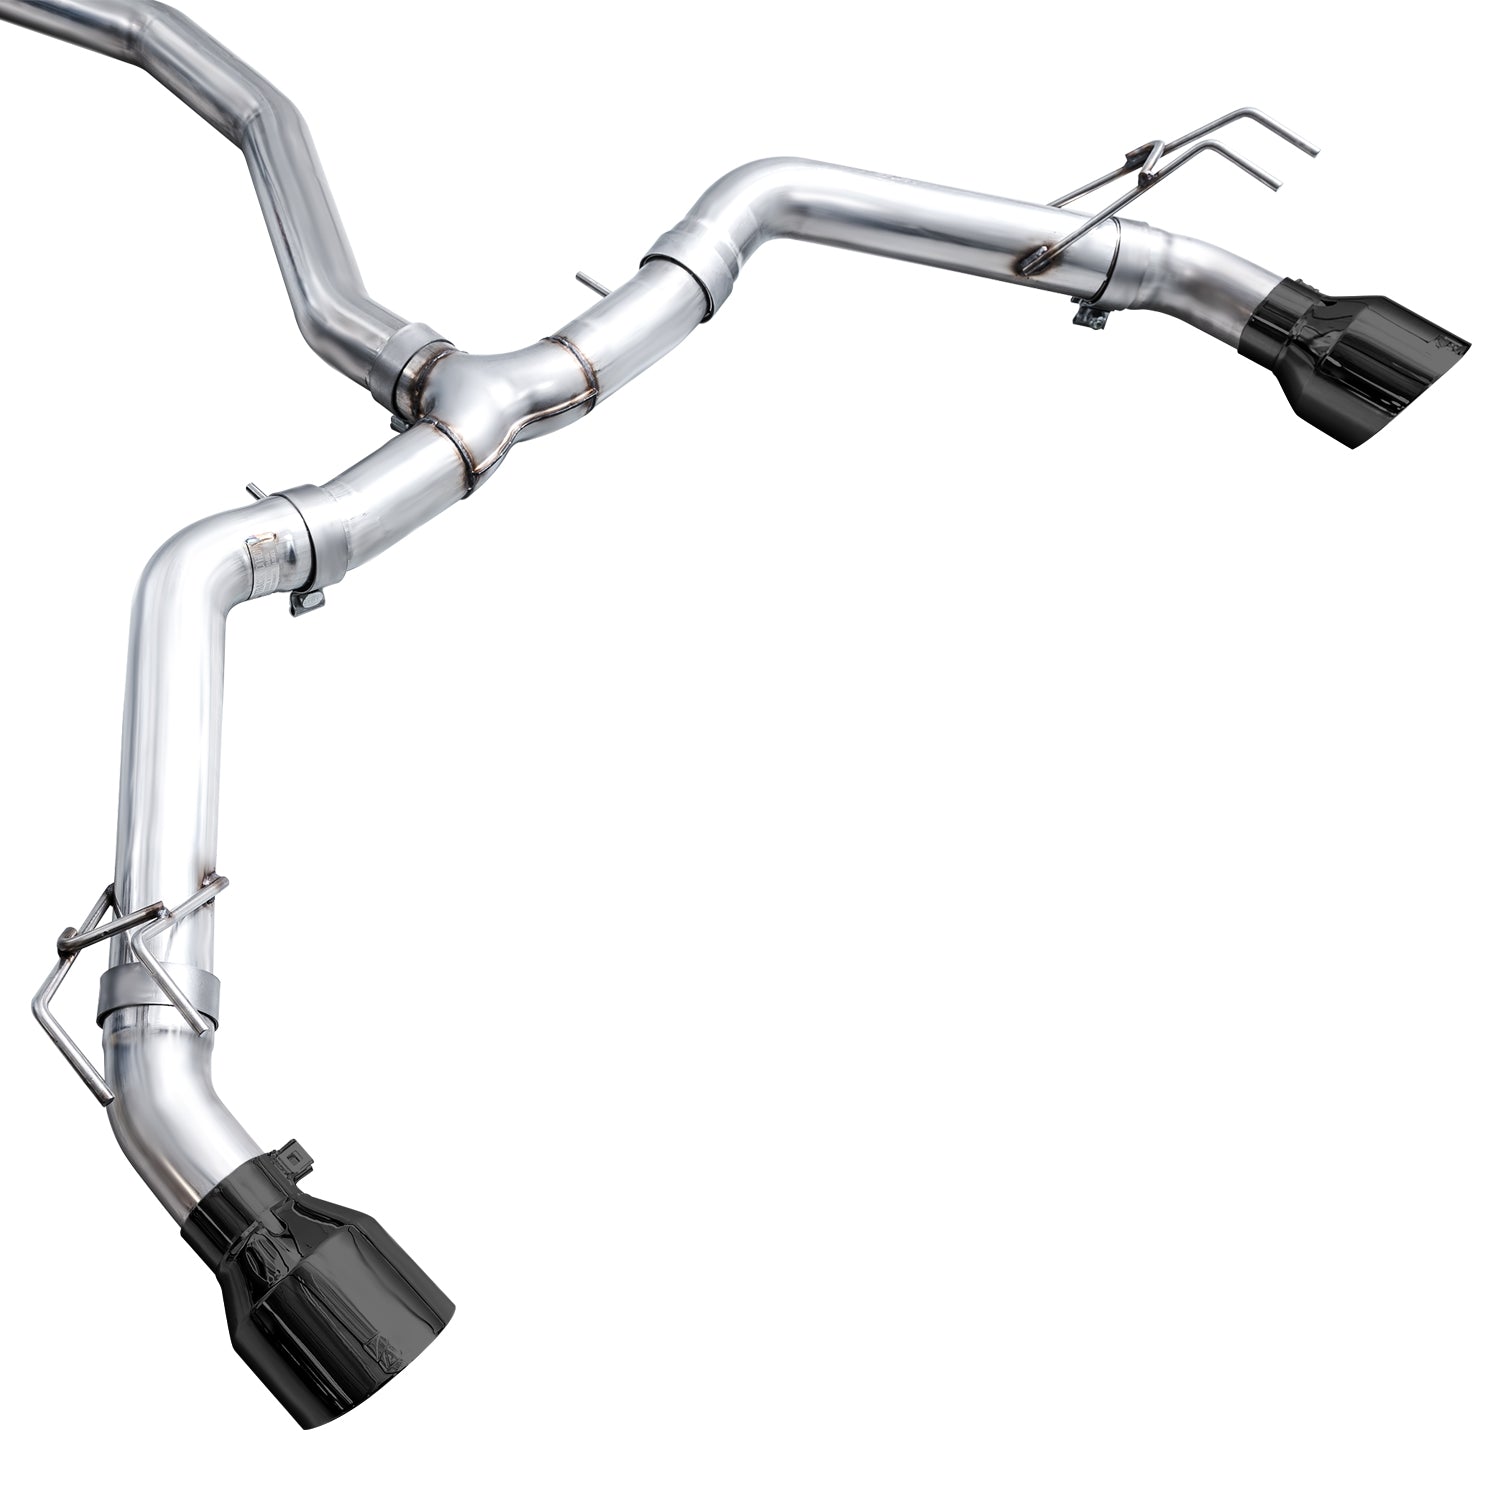 AWE EXHAUST SUITE FOR FE1 CIVIC SI / DE4 ACURA INTEGRA